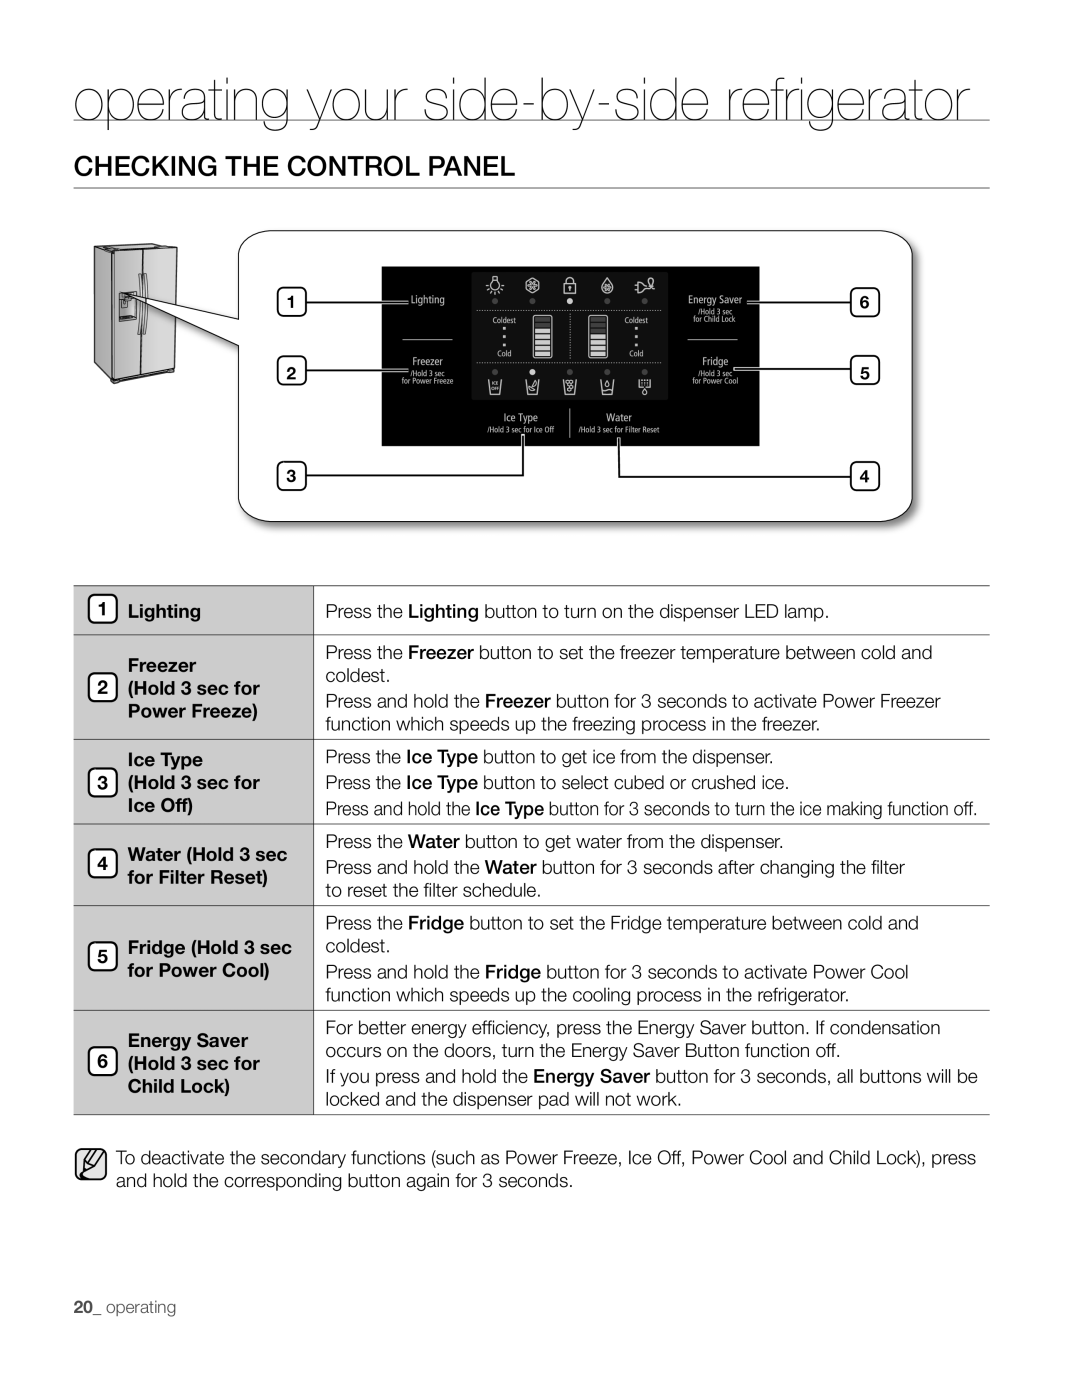 Samsung RS267TDBP user manual operating your side-by-side refrigerator, Checking The Control Panel 